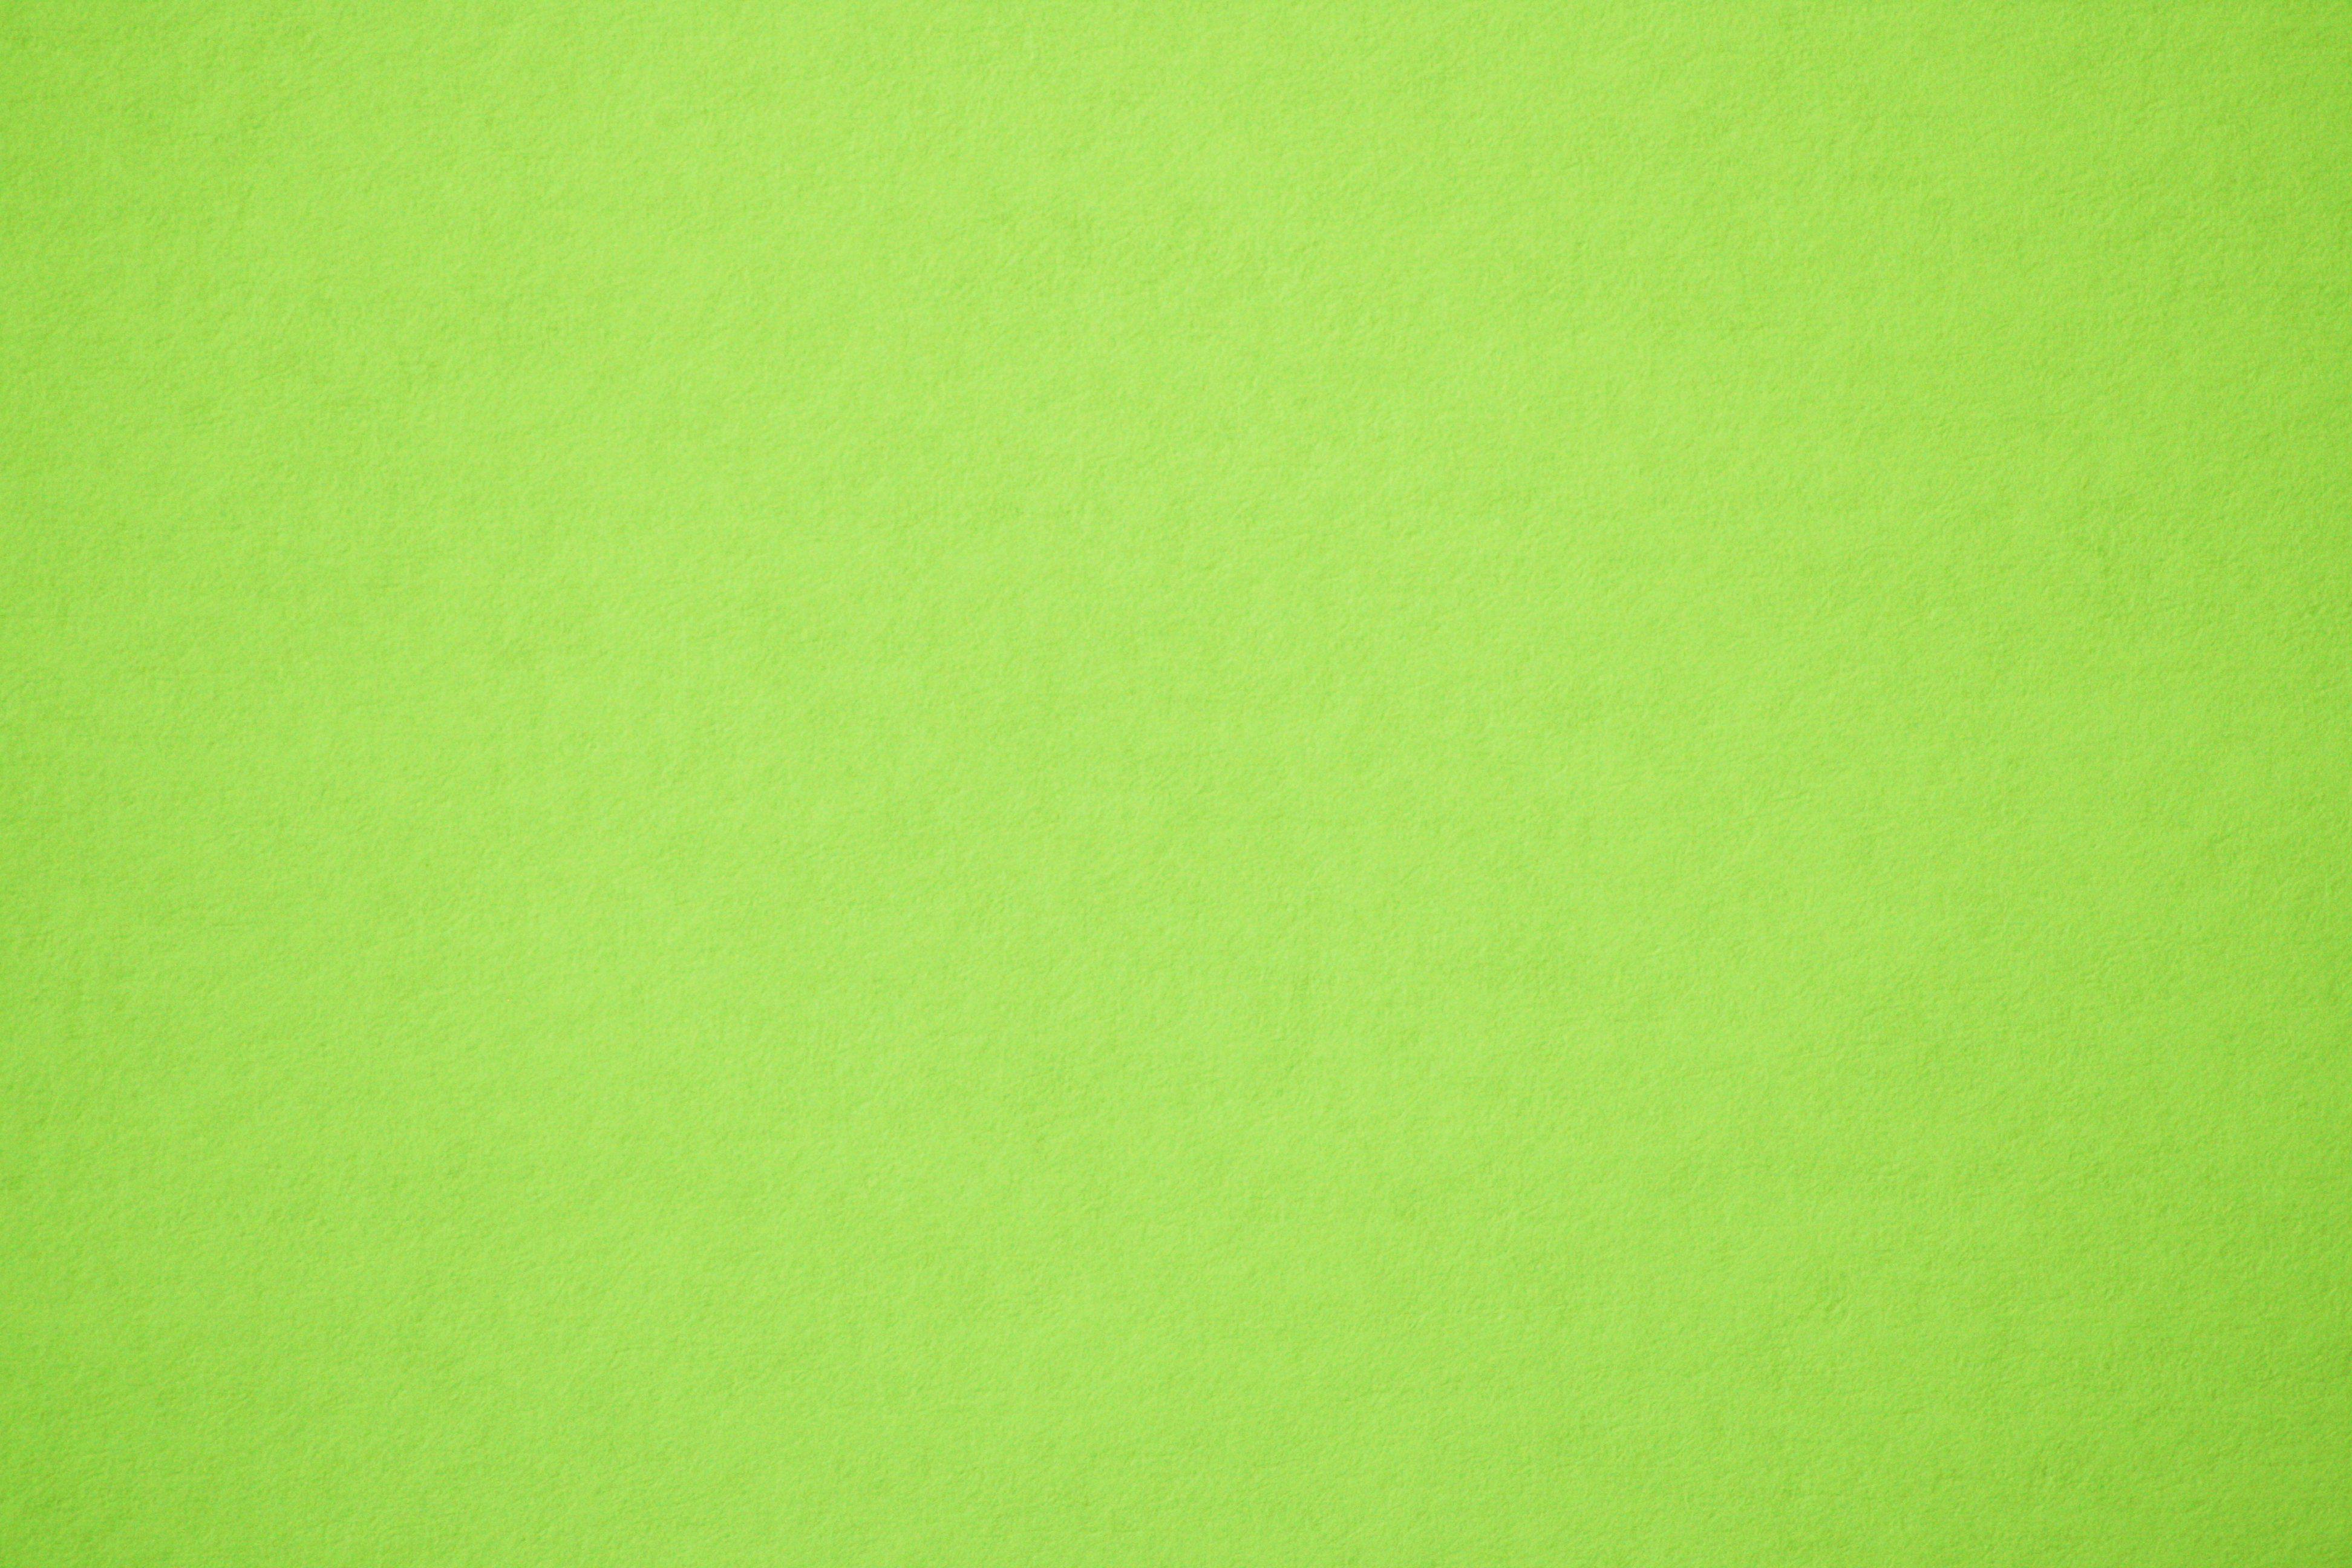 Lime Green Paper Texture Picture. Free Photograph. Photo Public